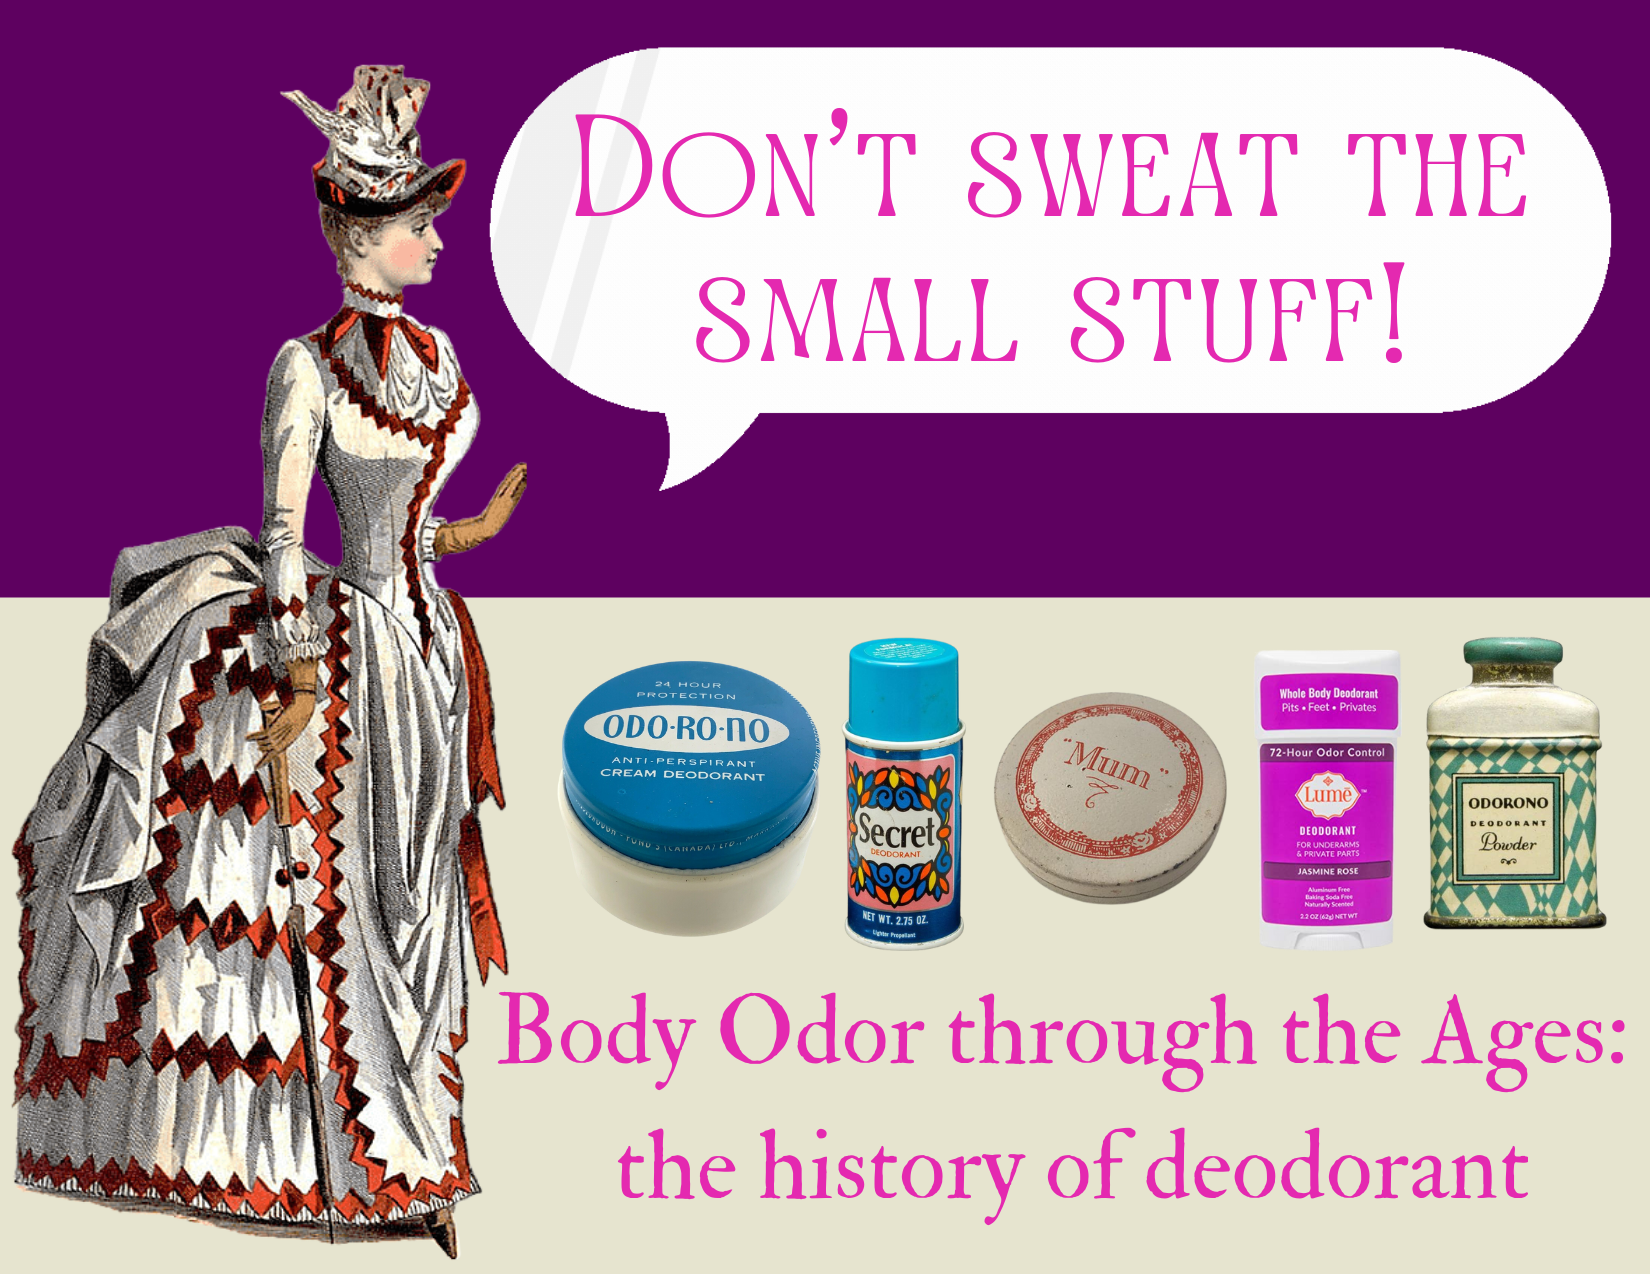 Don't Sweat the Small Stuff! Body Odor through the Ages: the history of deodorant